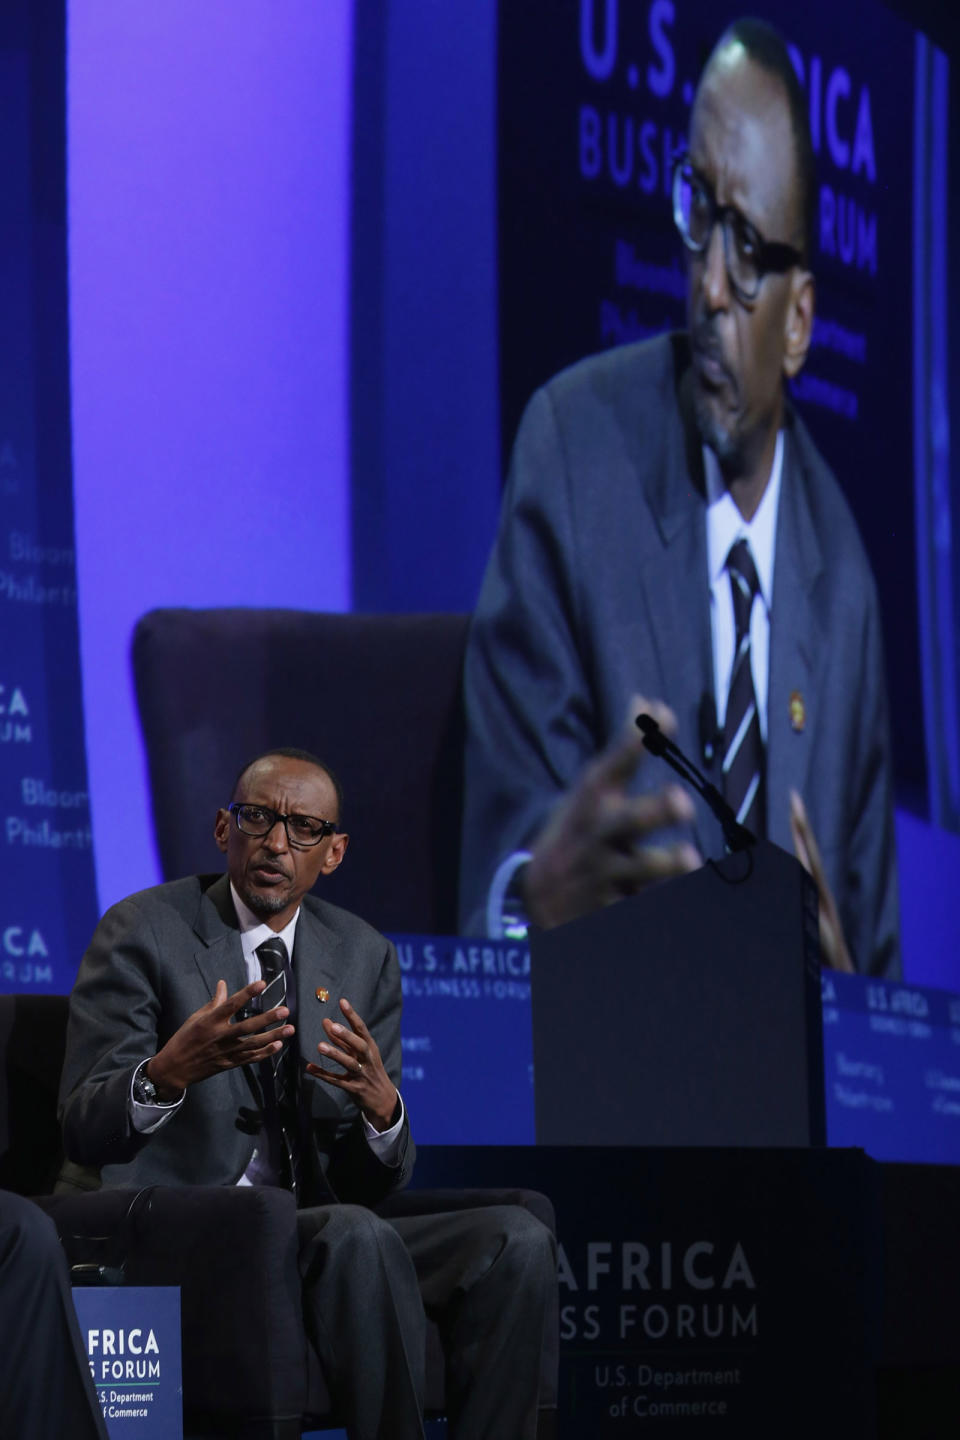 U.S. Rwanda President Paul Kagame speaks during a panel at the U.S.-Africa Business Forum on August 5, 2014 in Washington, D.C.<span class="copyright">Chip Somodevilla—Getty Images</span>